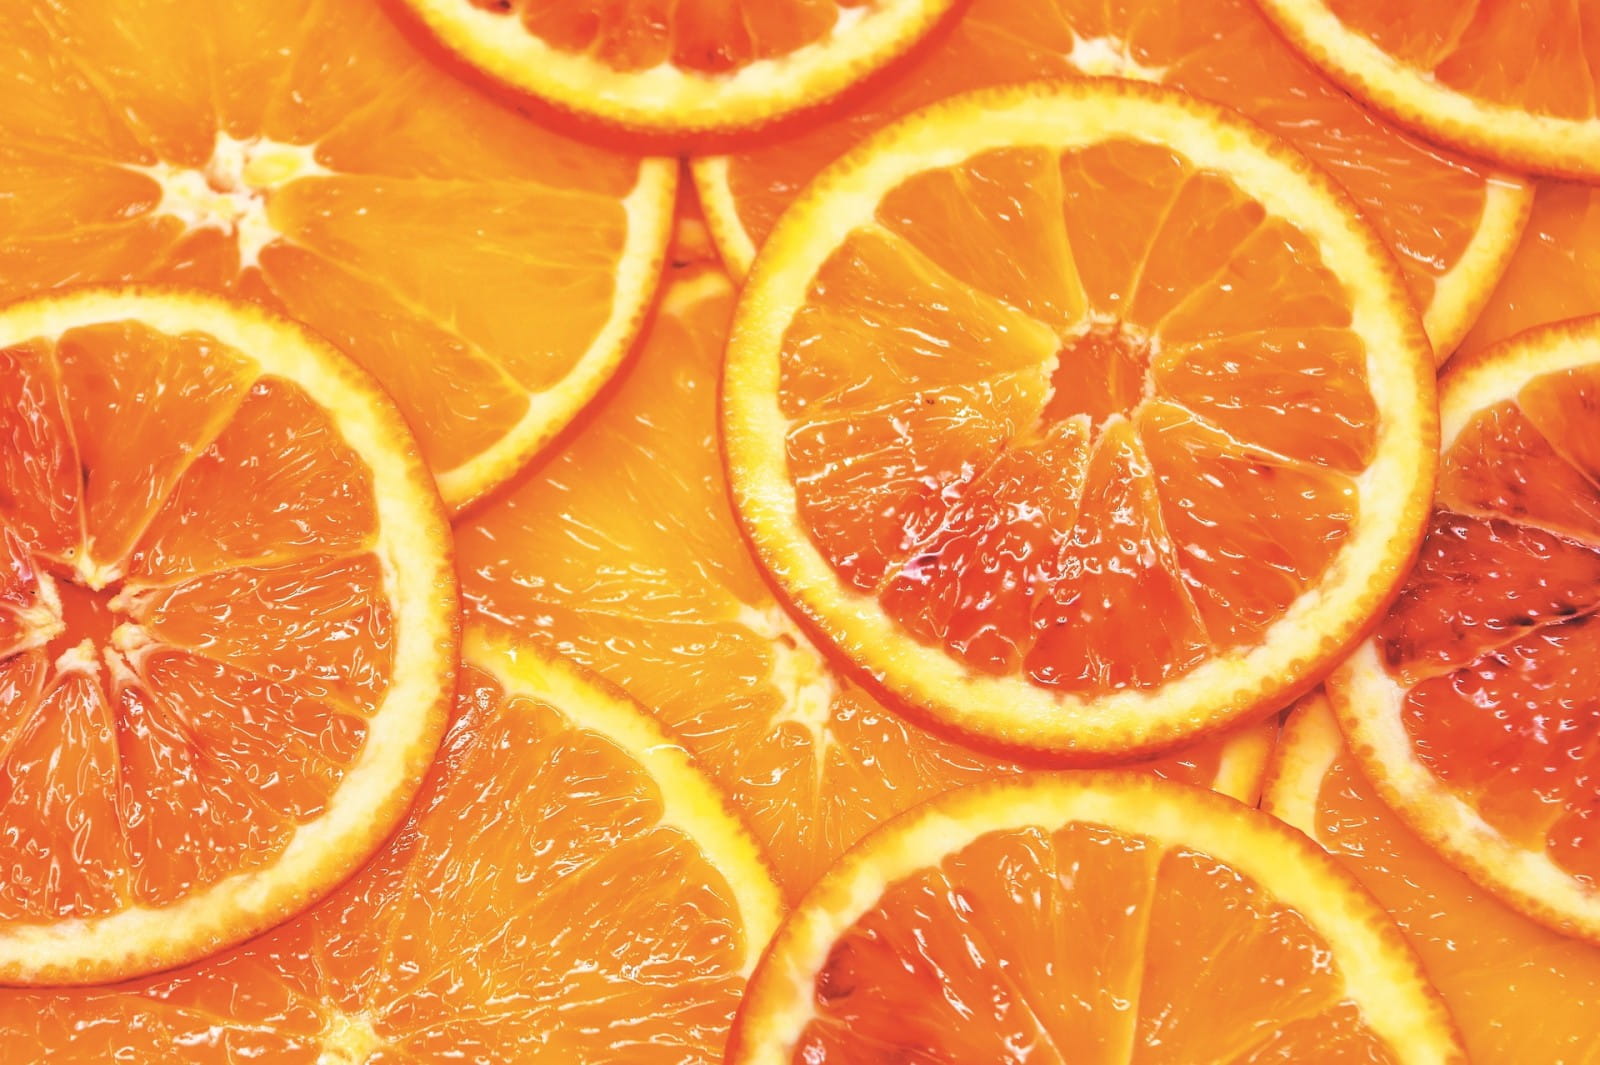 A refreshing punch for a New Year's Day brunch